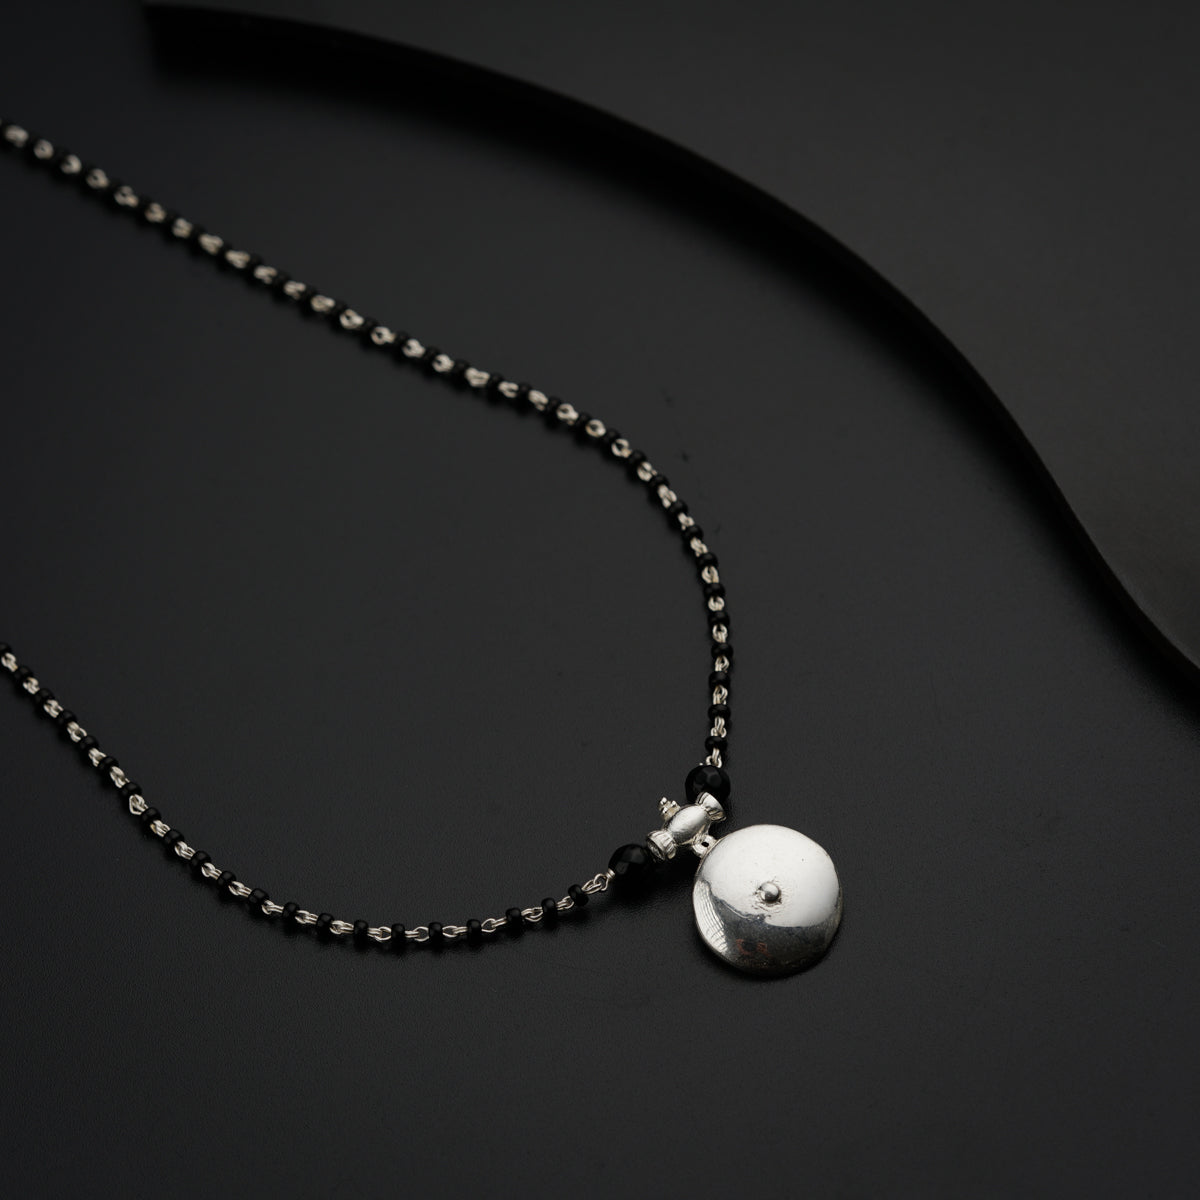 a black necklace with a white ball on it